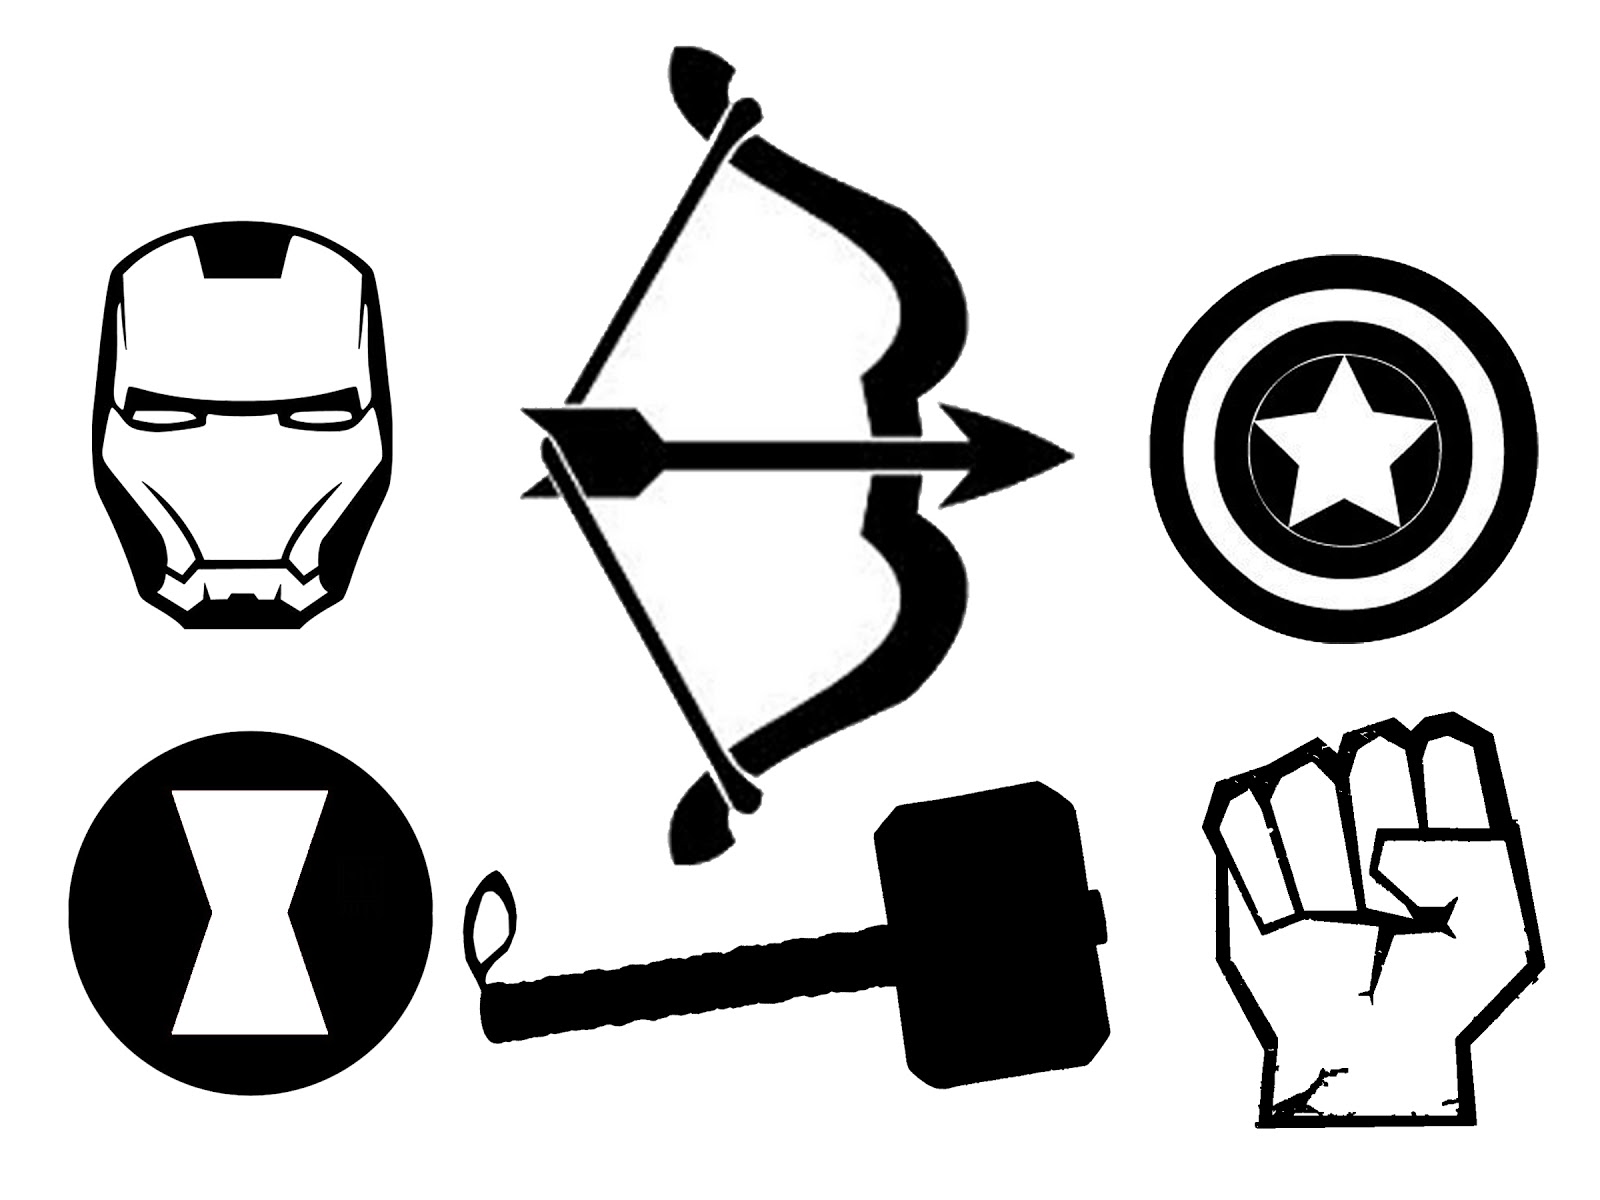 1000+ images about Avengers | Avengers birthday ...